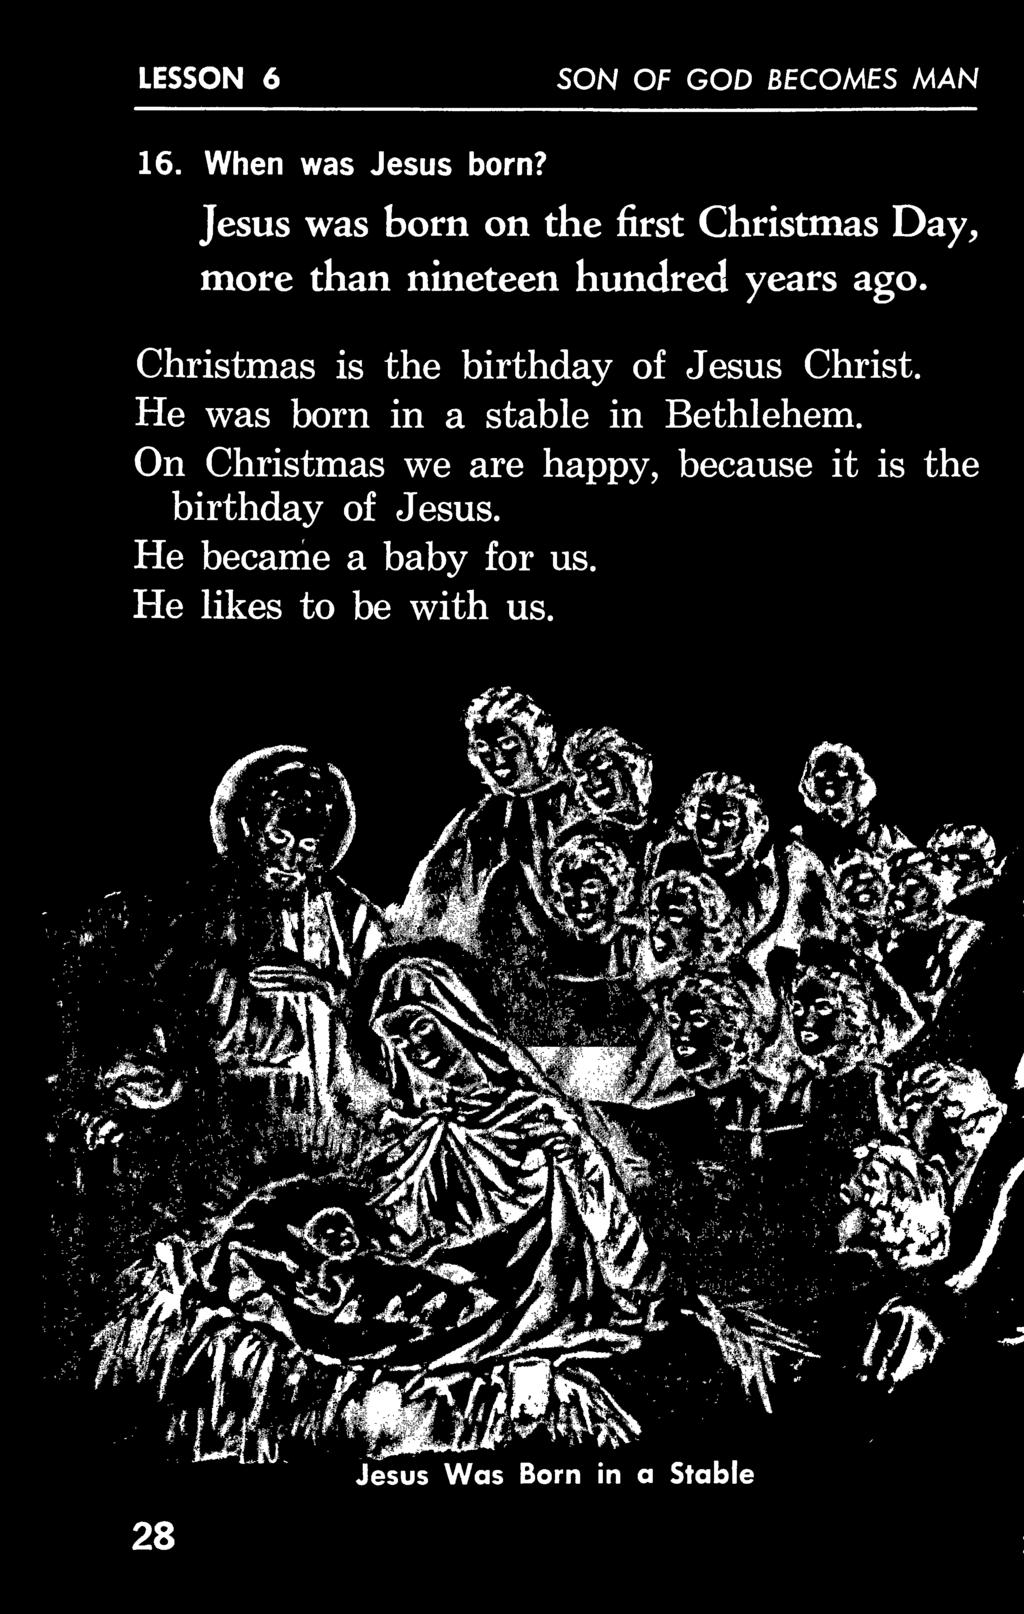 Christmas is the birthday of Jesus Christ. He was born in a stable in Bethlehem.